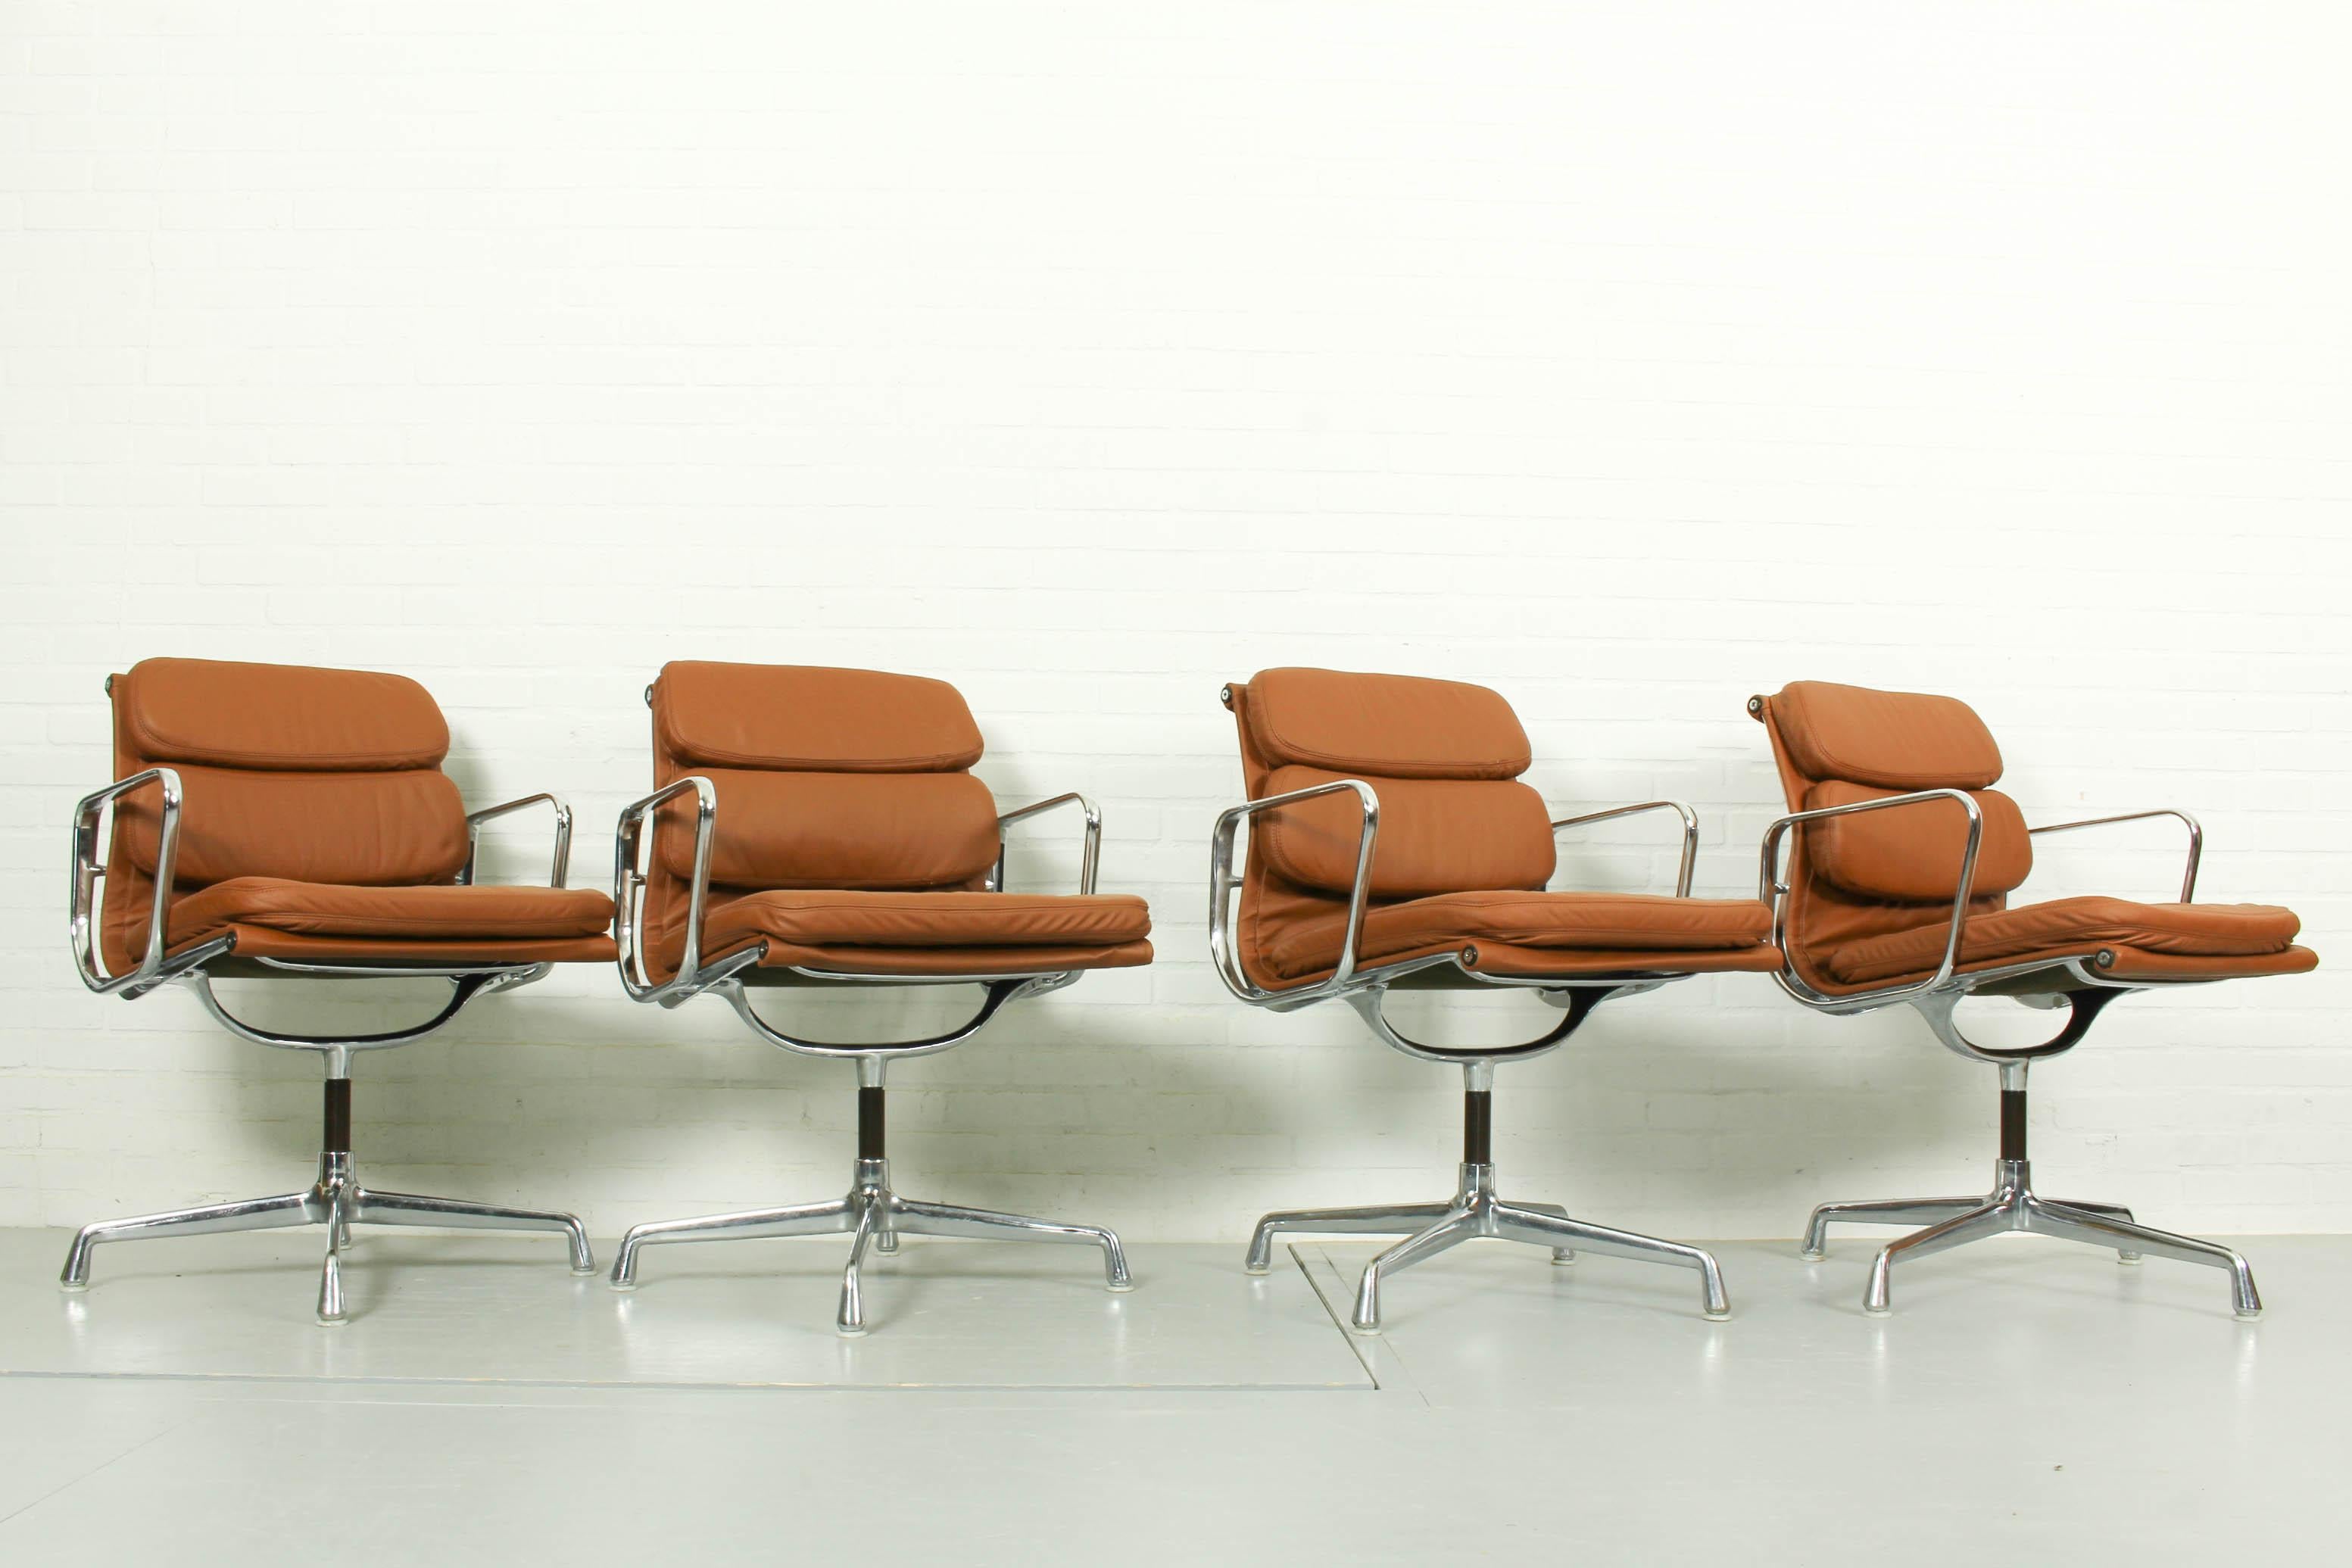 Set of 4 vintage cognac leather aluminum chairs designed by Charles and Ray Eames and manufactured by Vitra. In cognac leather.